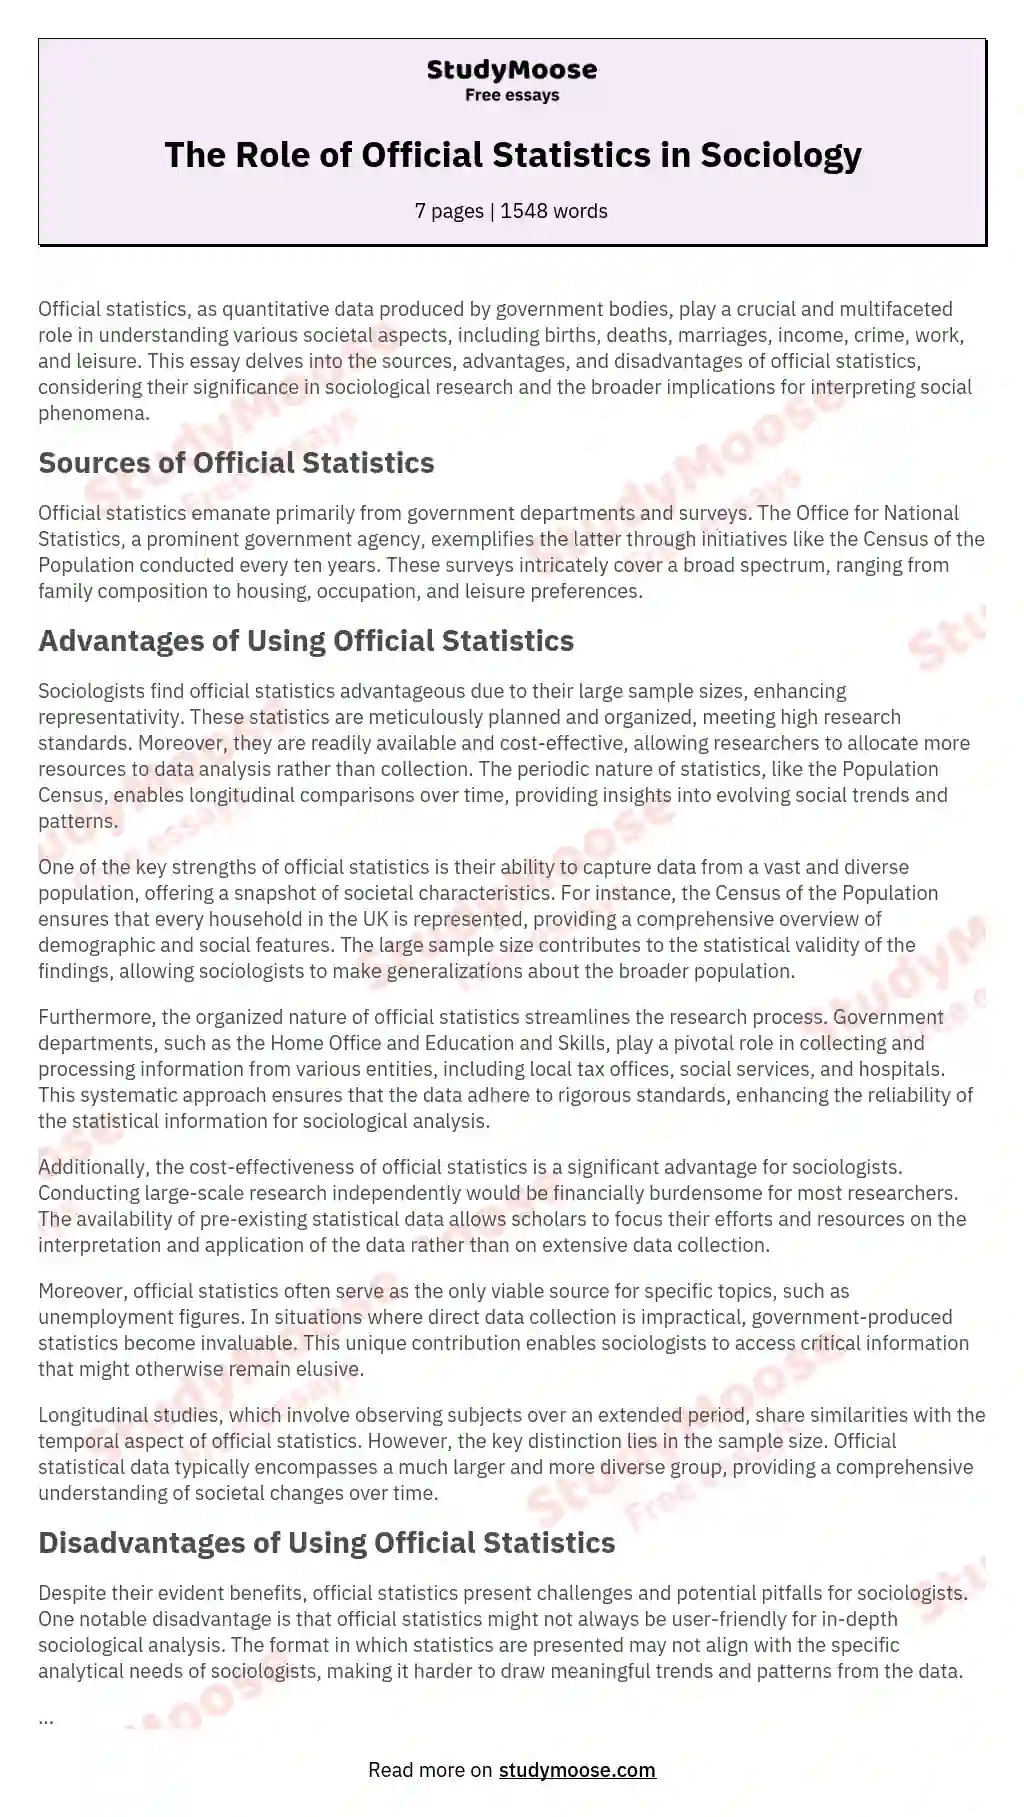 The Role of Official Statistics in Sociology essay